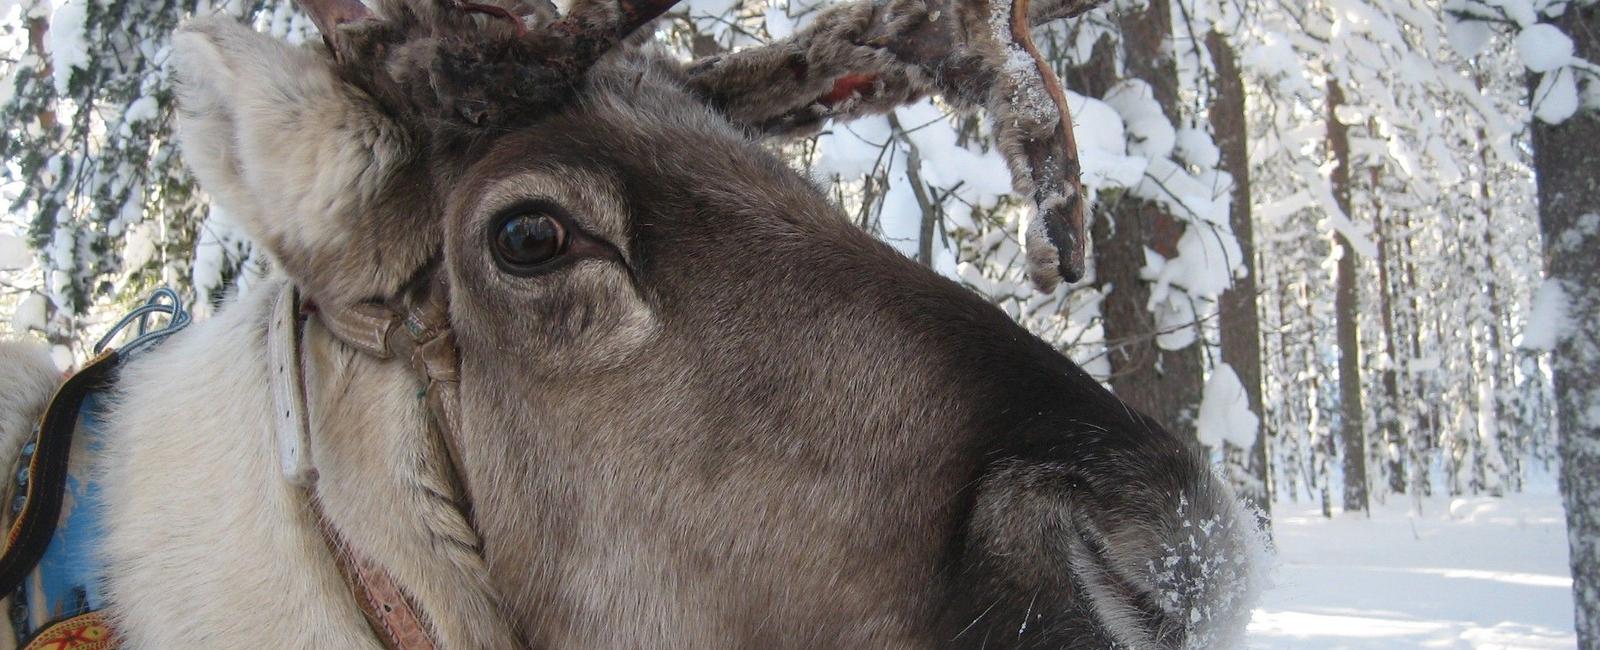 Reindeer eyeballs turn blue in winter to help them see at lower light levels